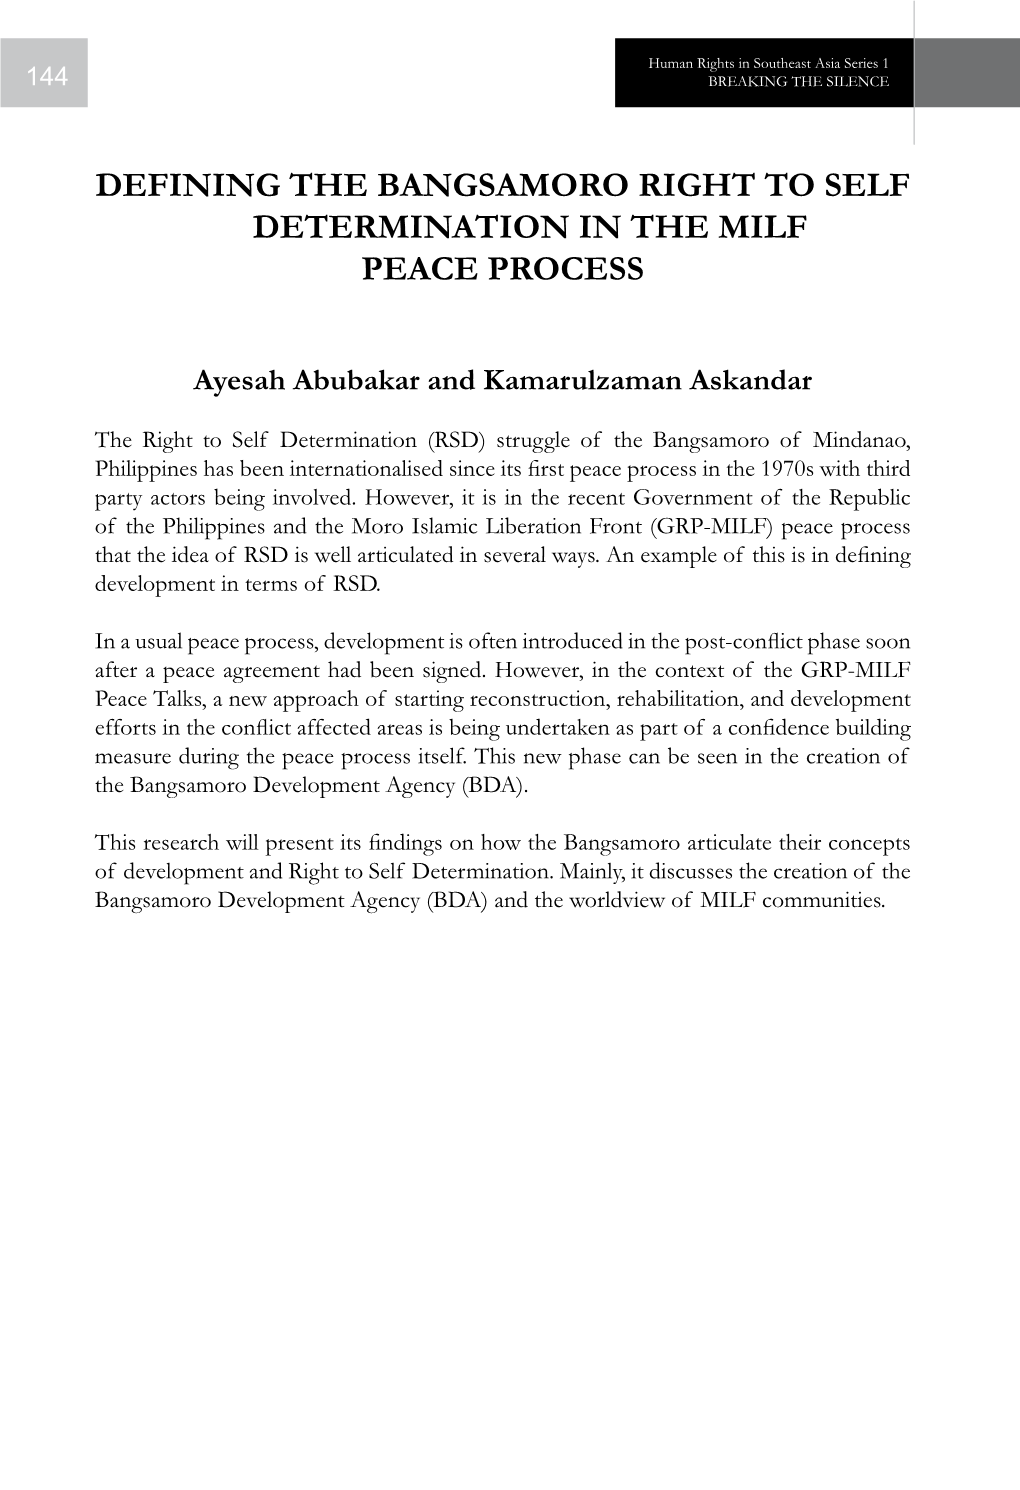 Defining the Bangsamoro Right to Self Determination in the MILF Peace Process